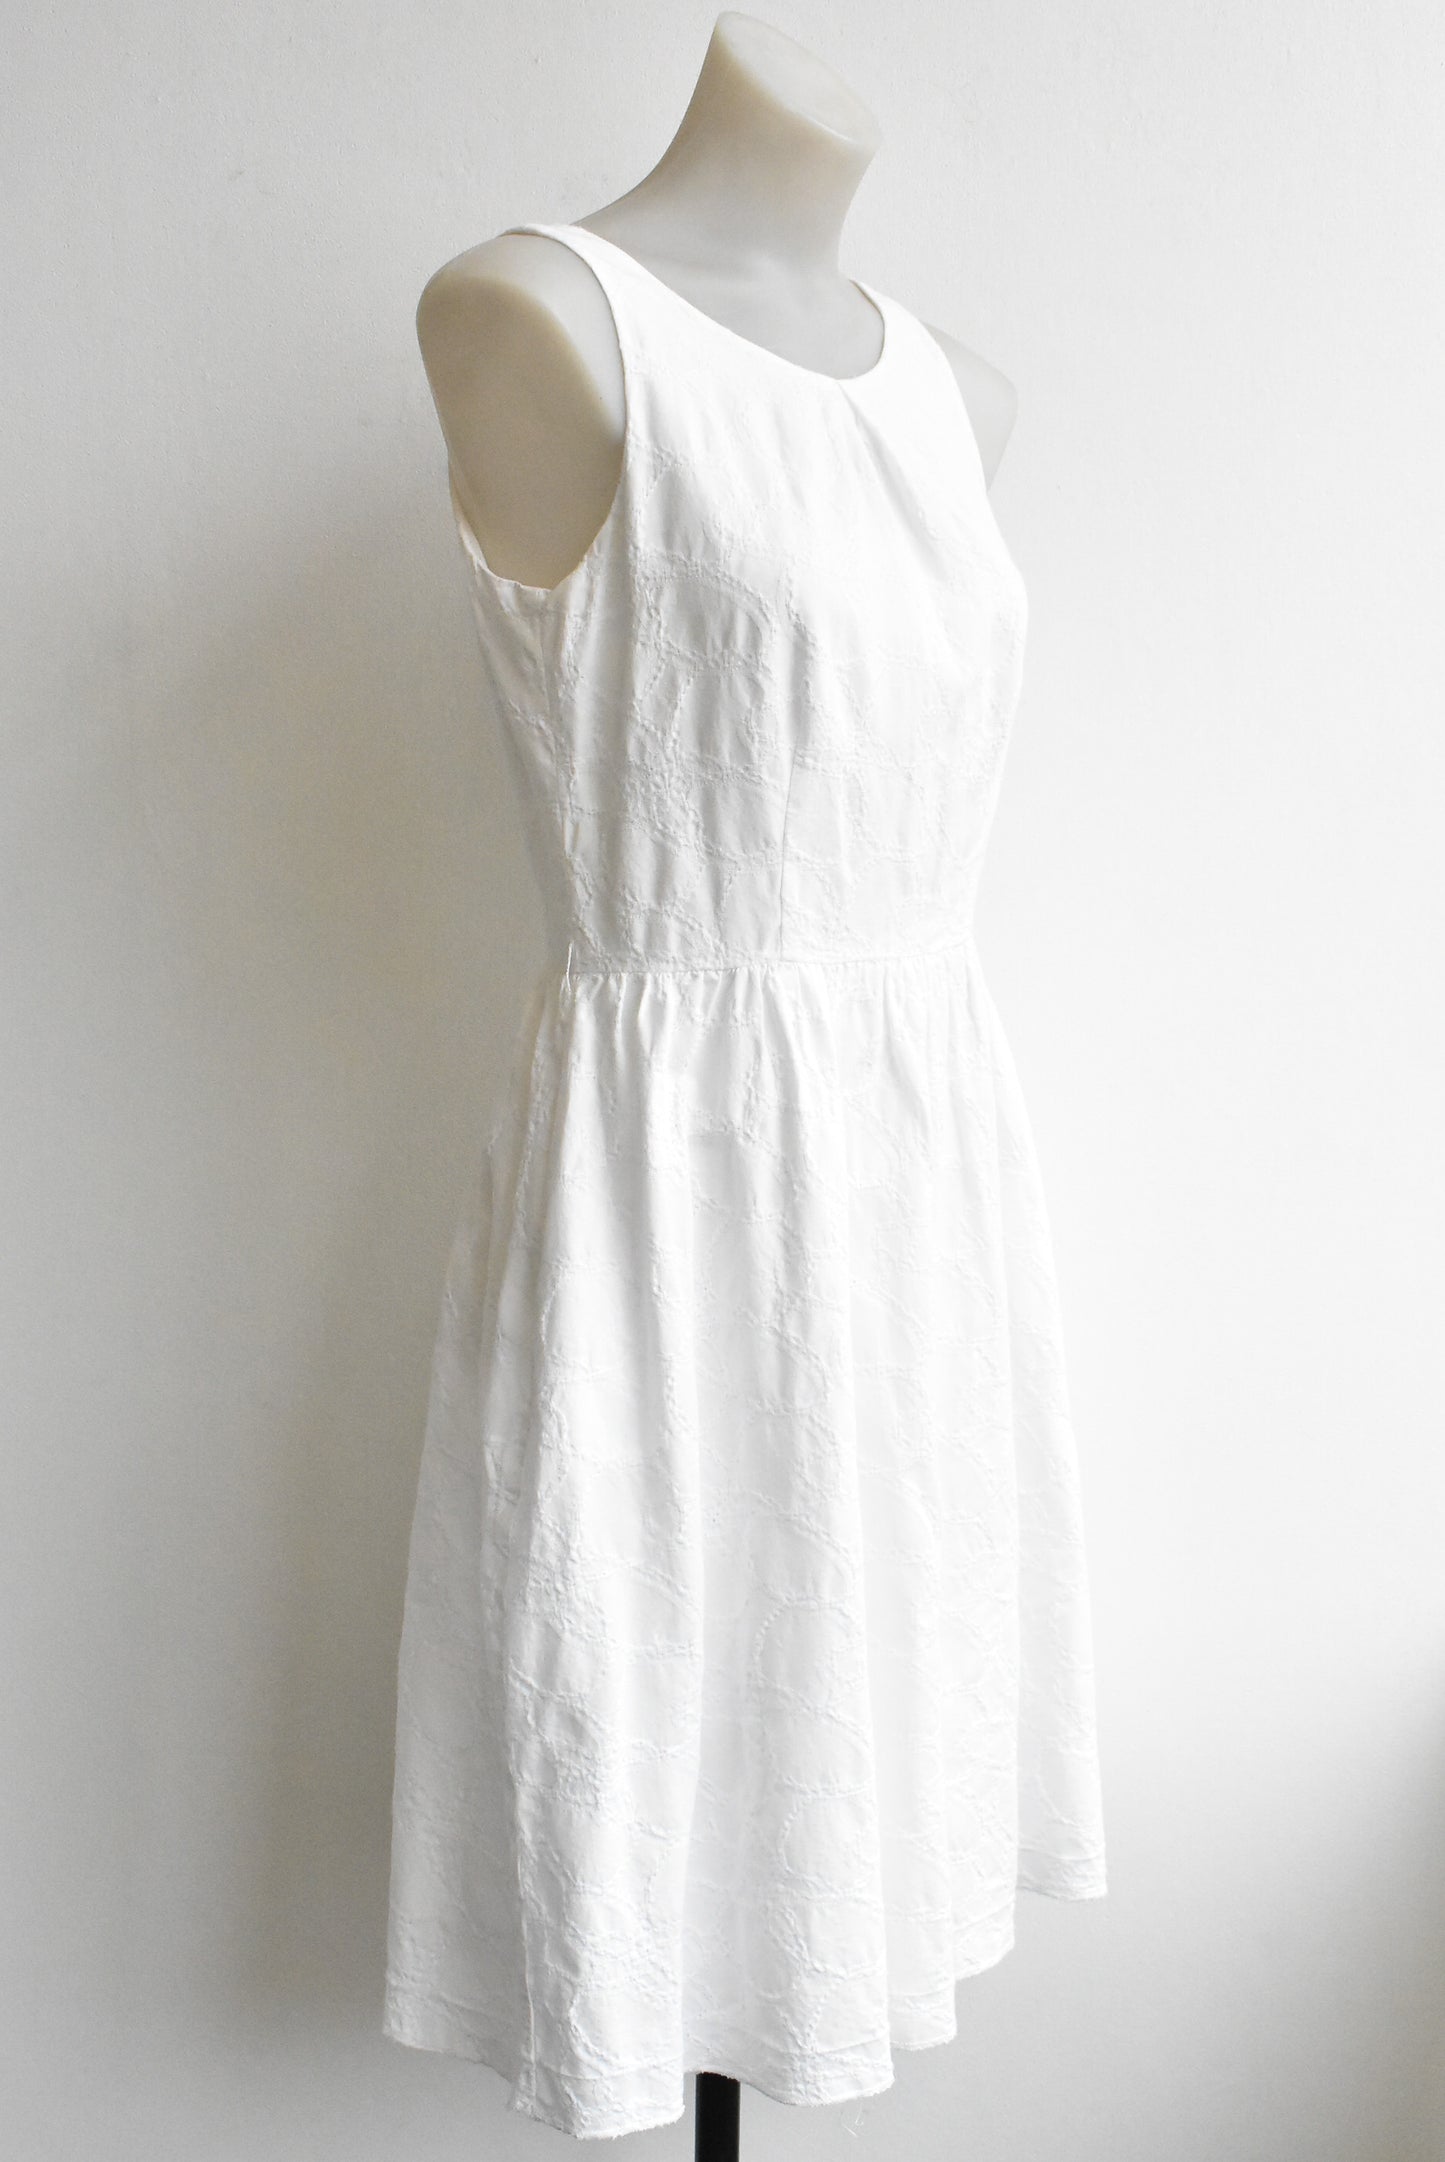 Veronika Maine embroidered white dress with pockets, size 8